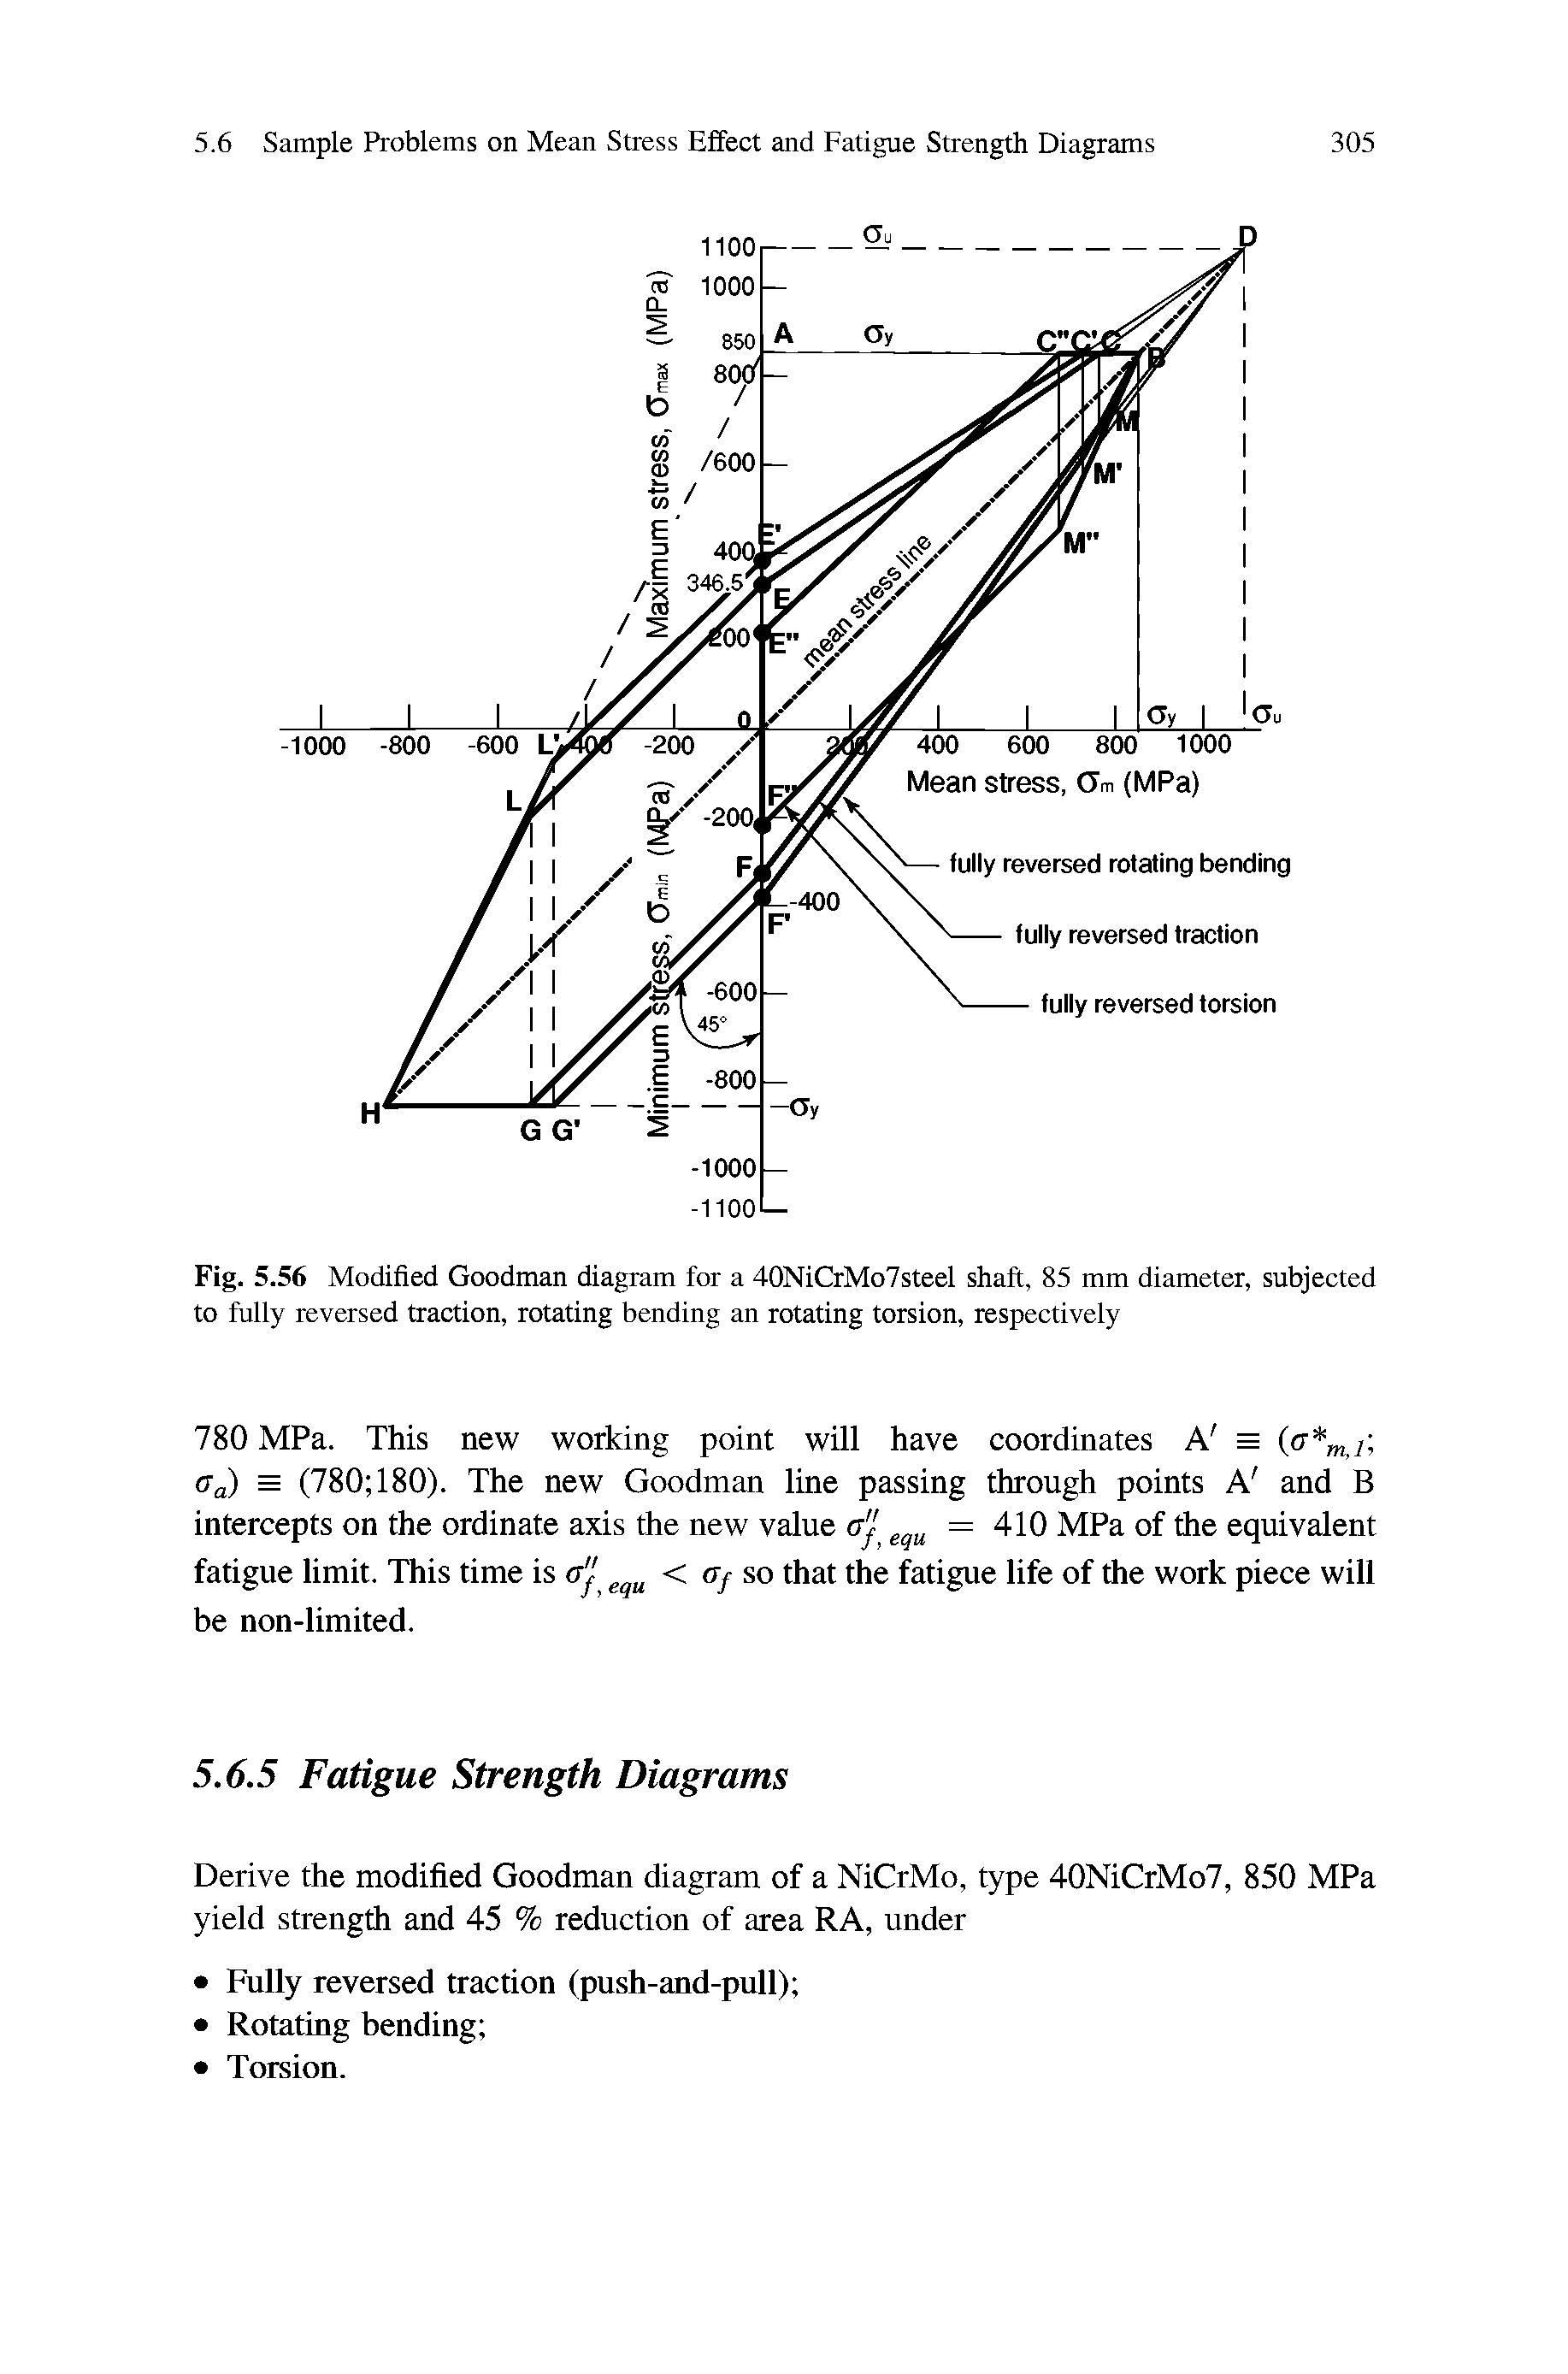 Fig. 5.56 Modified Goodman diagram for a 40NiCrMo7steel shaft, 85 mm diameter, subjected to fully reversed traction, rotating bending an rotating torsion, respectively...